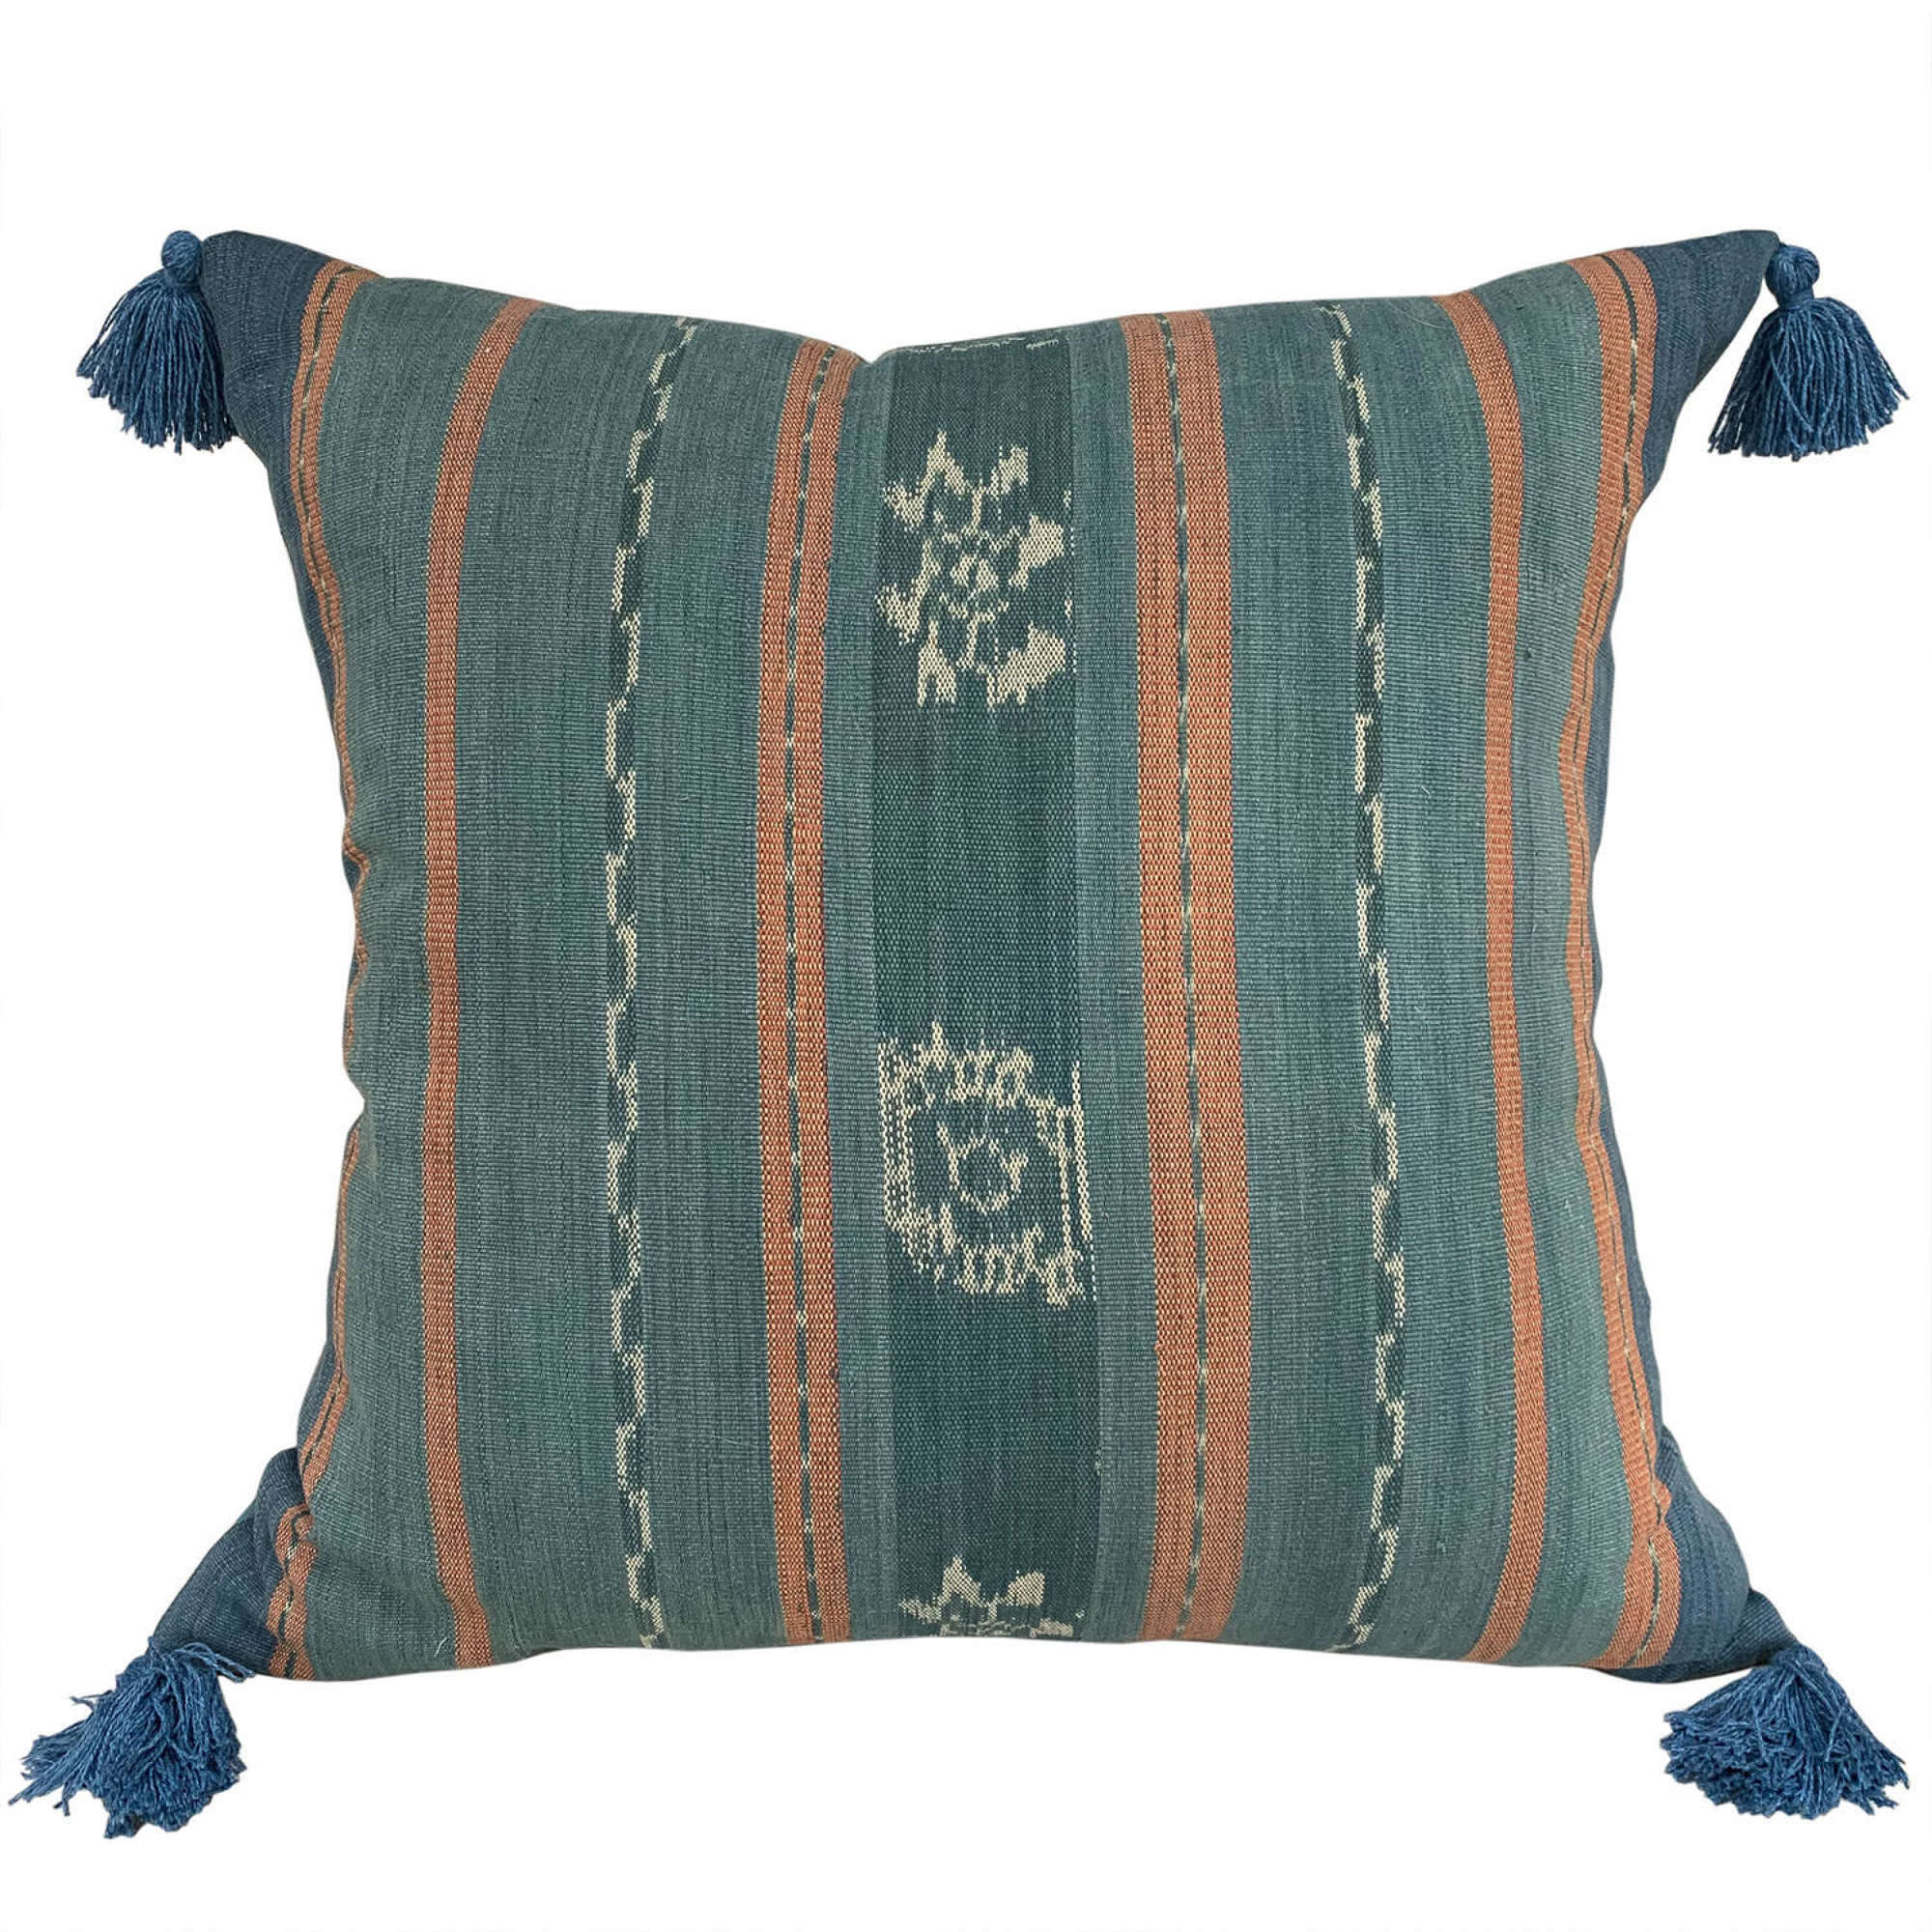 Large Flores ikat cushions with tassels